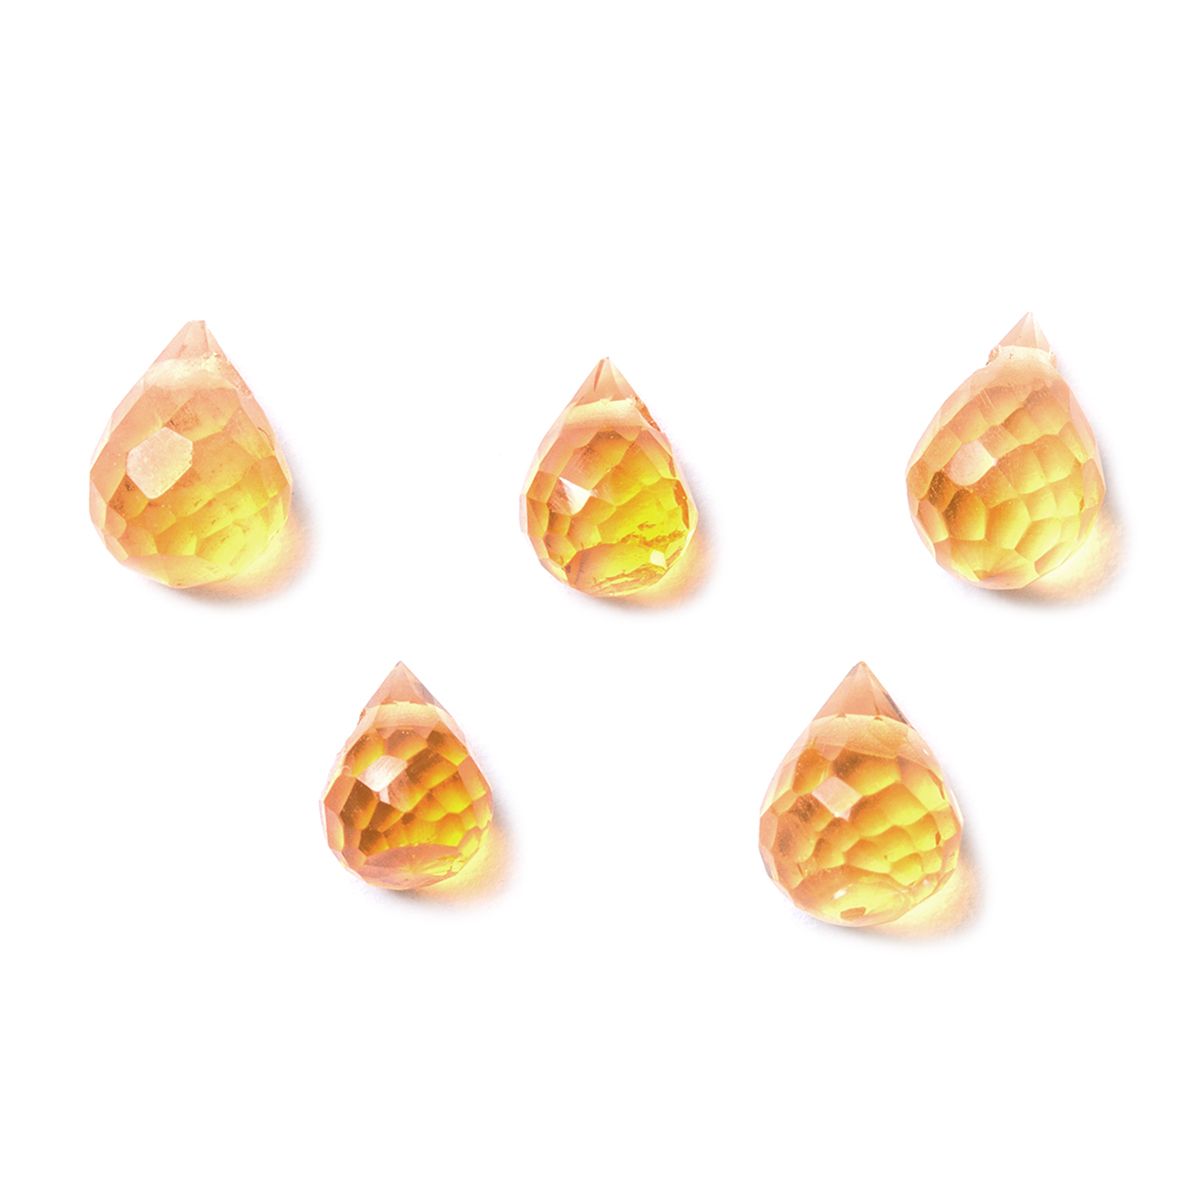 Citrine Faceted Drop Briolette Beads - Approx From 3.5mm, Packs of 10 Beads